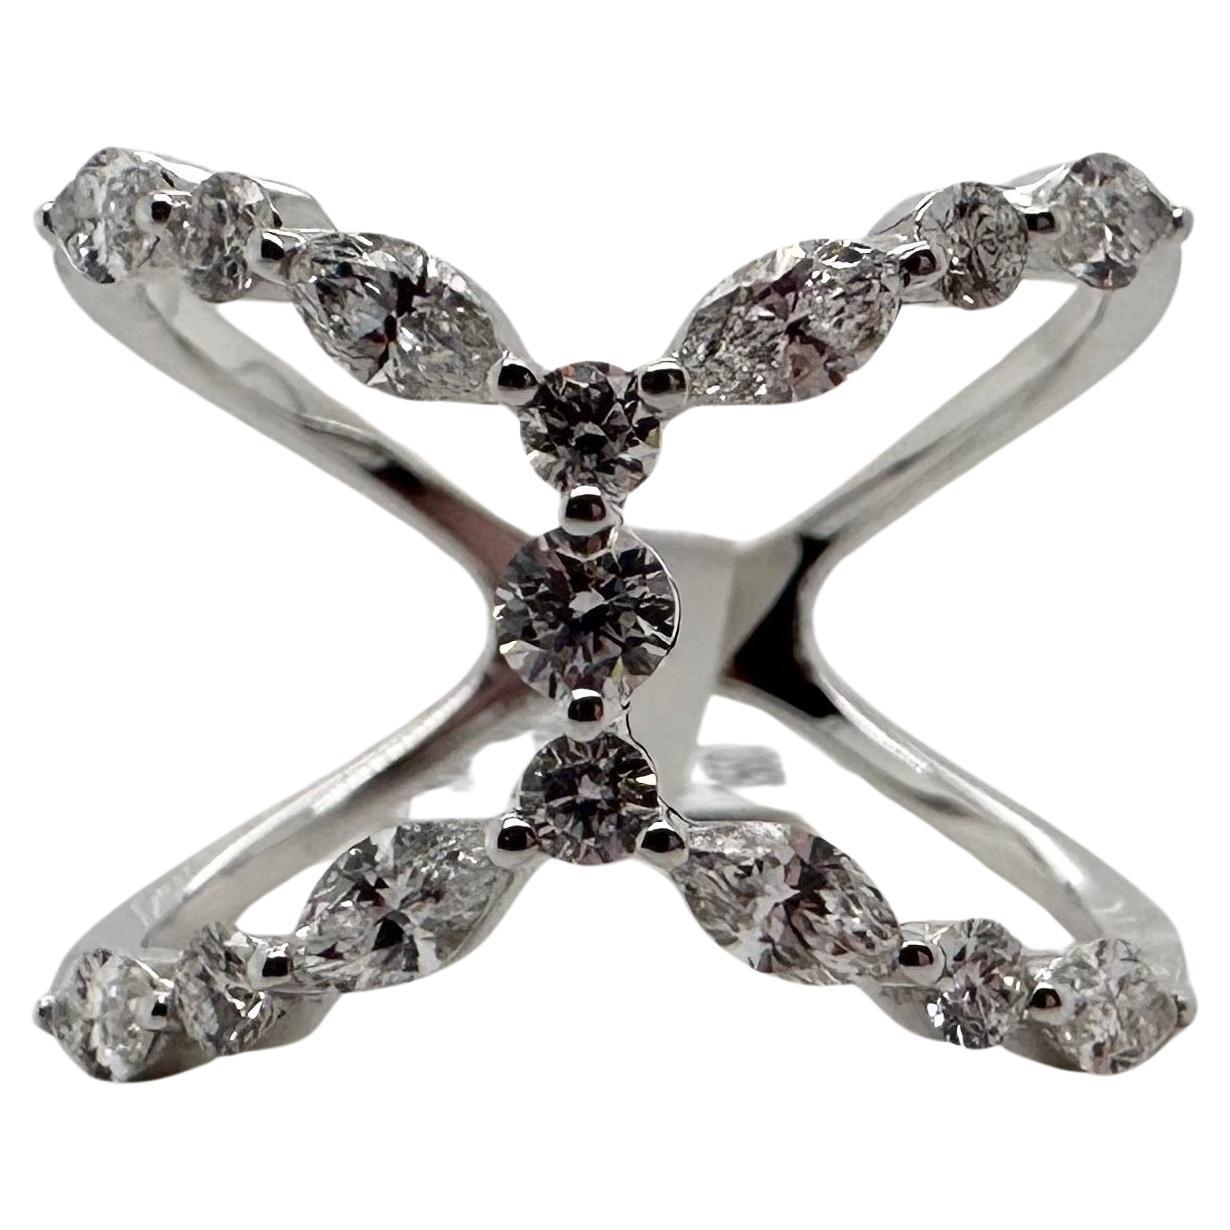 Marquise diamond ring 1.01ct 18KT white gold size 7